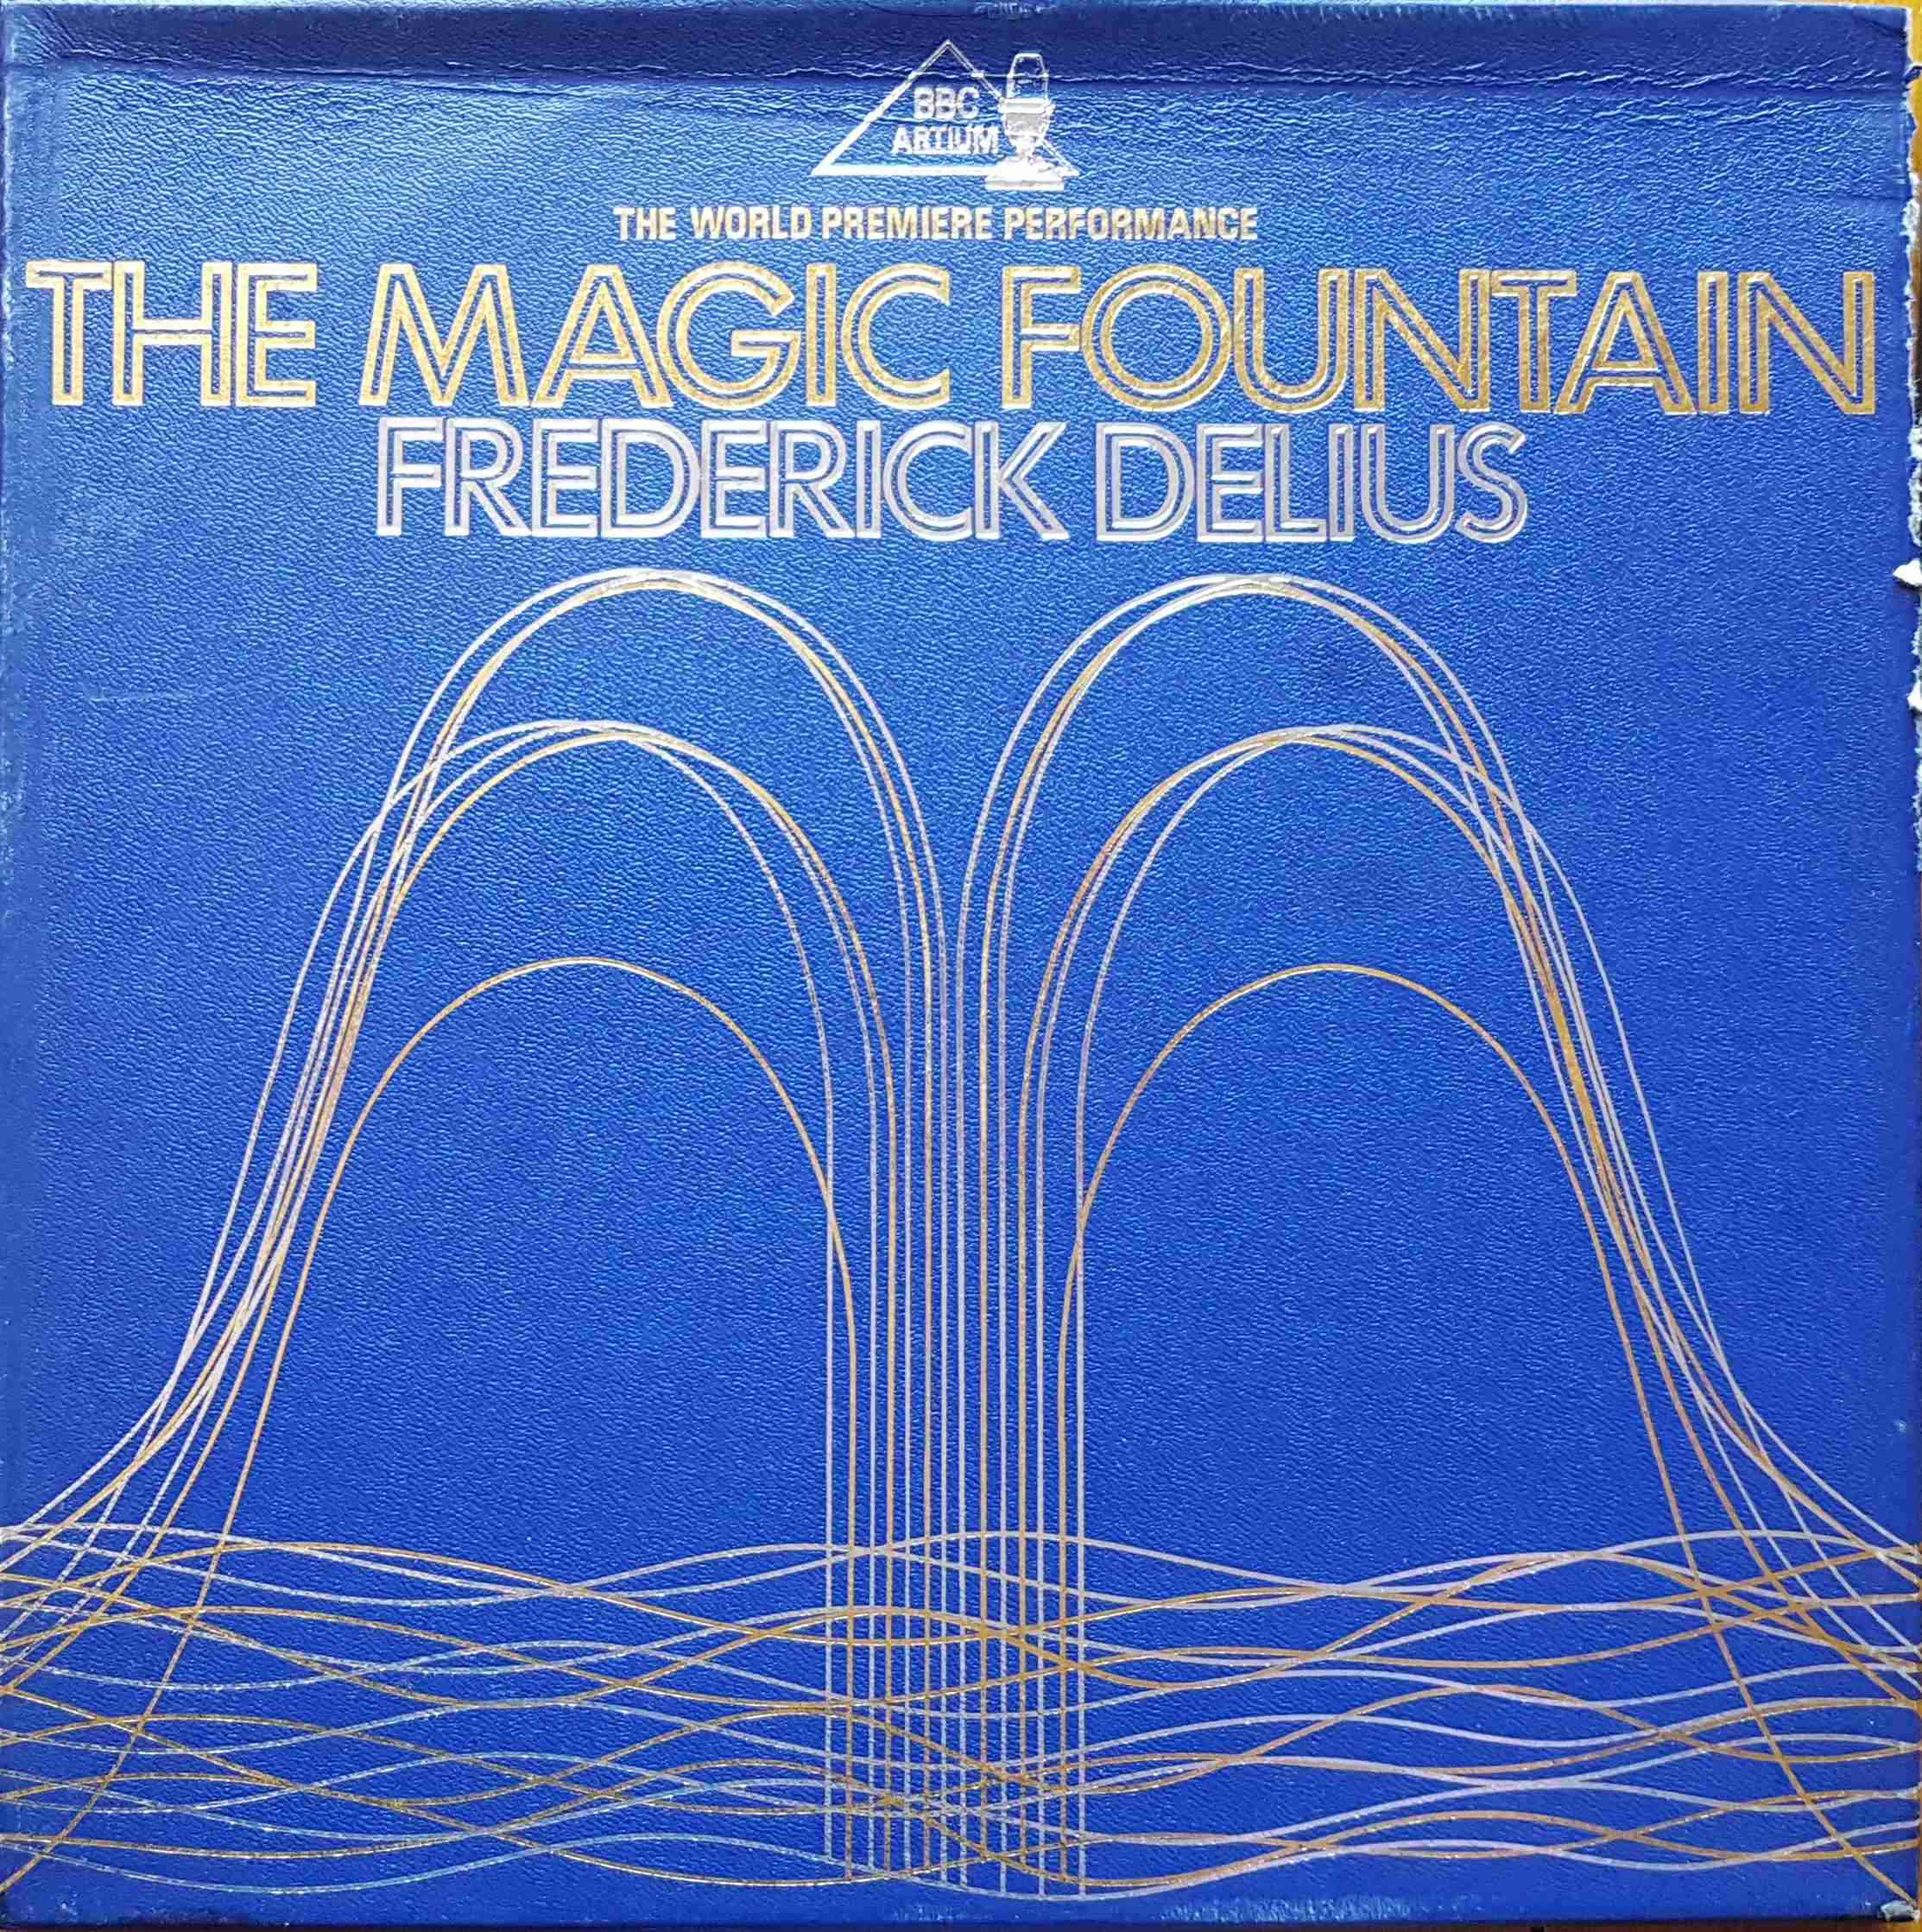 Picture of BBC 2001 The magic fountain by artist Frederick Delius from the BBC albums - Records and Tapes library